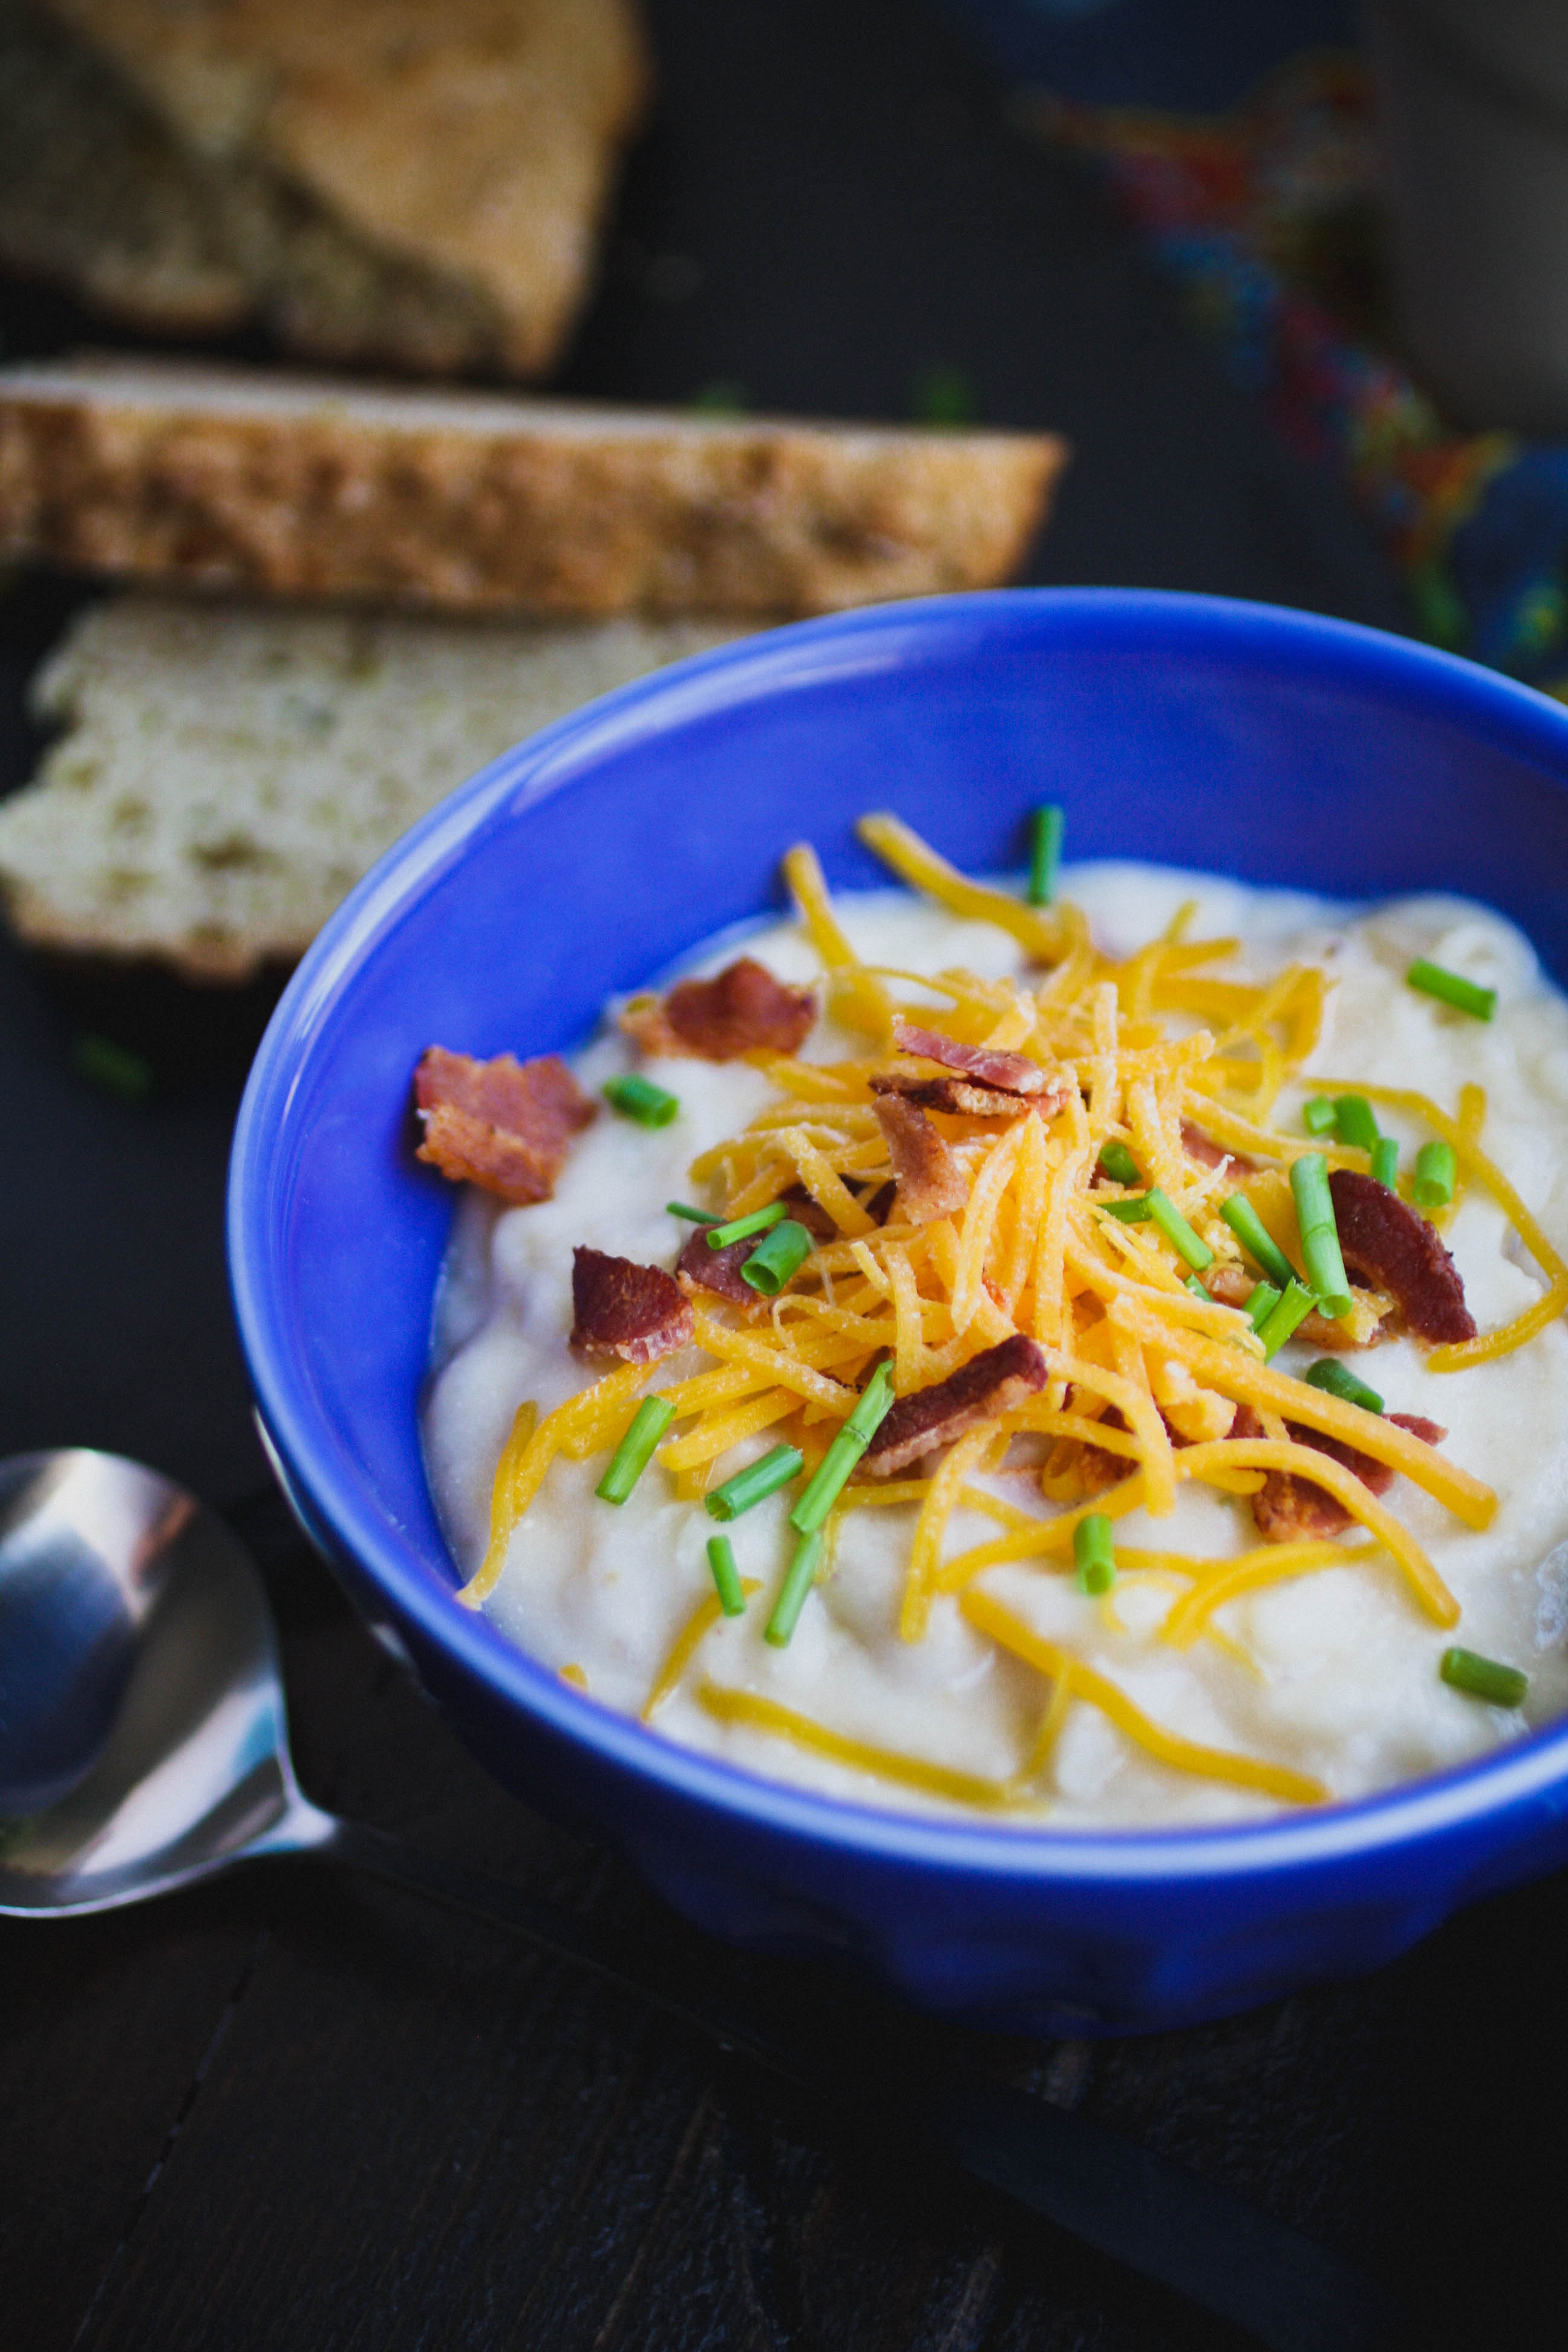 Loaded Baked Potato Soup is ideal on a cold night. Loaded Baked Potato Soup is a delight any night of the week.